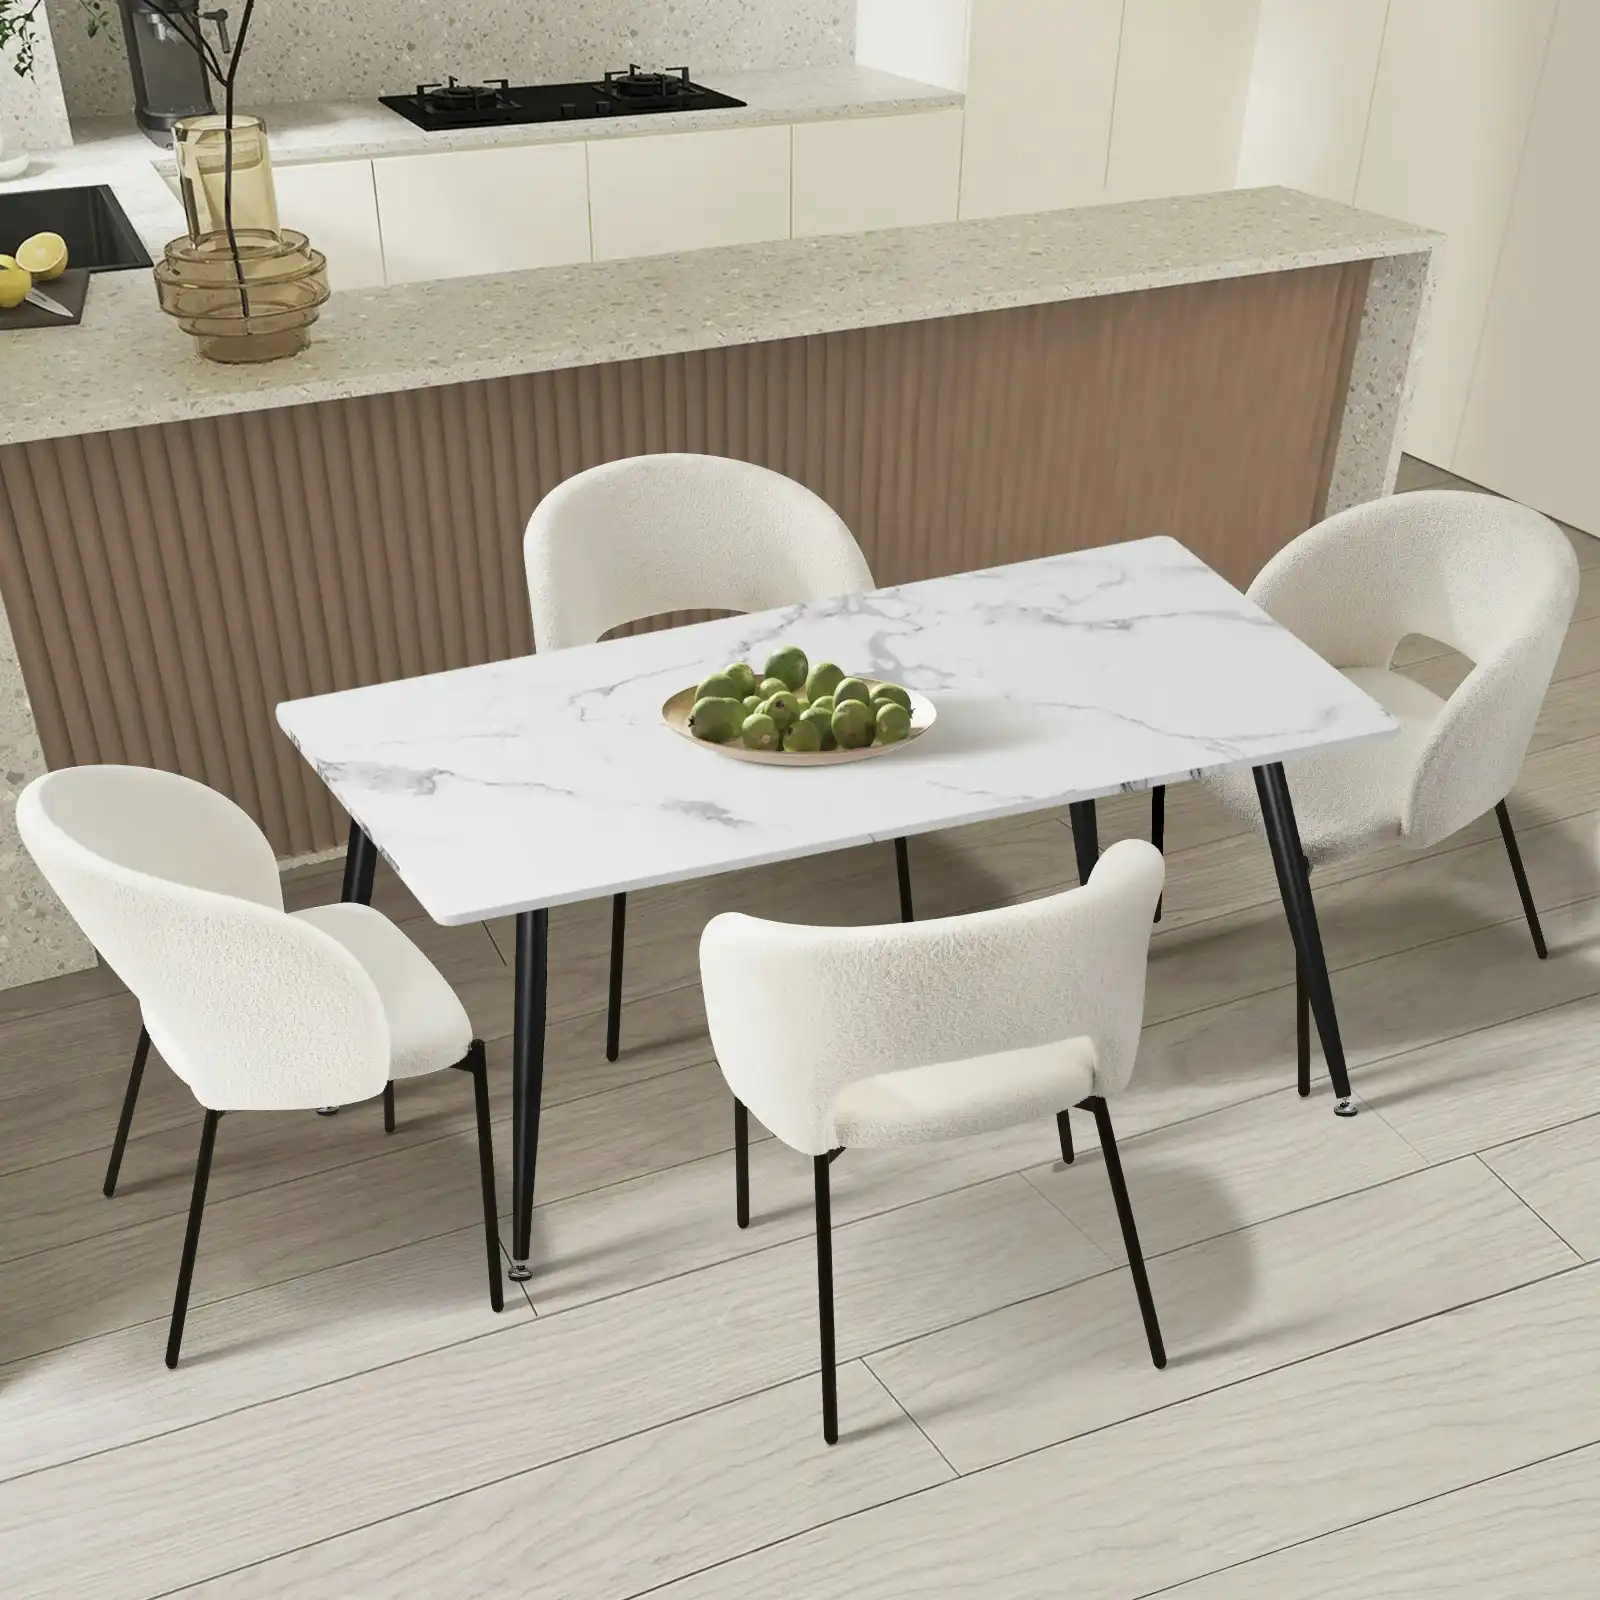 Oikiture 5PCS Dining sets 120cm Rectangle Table with 4PCS Chairs Sherpa White